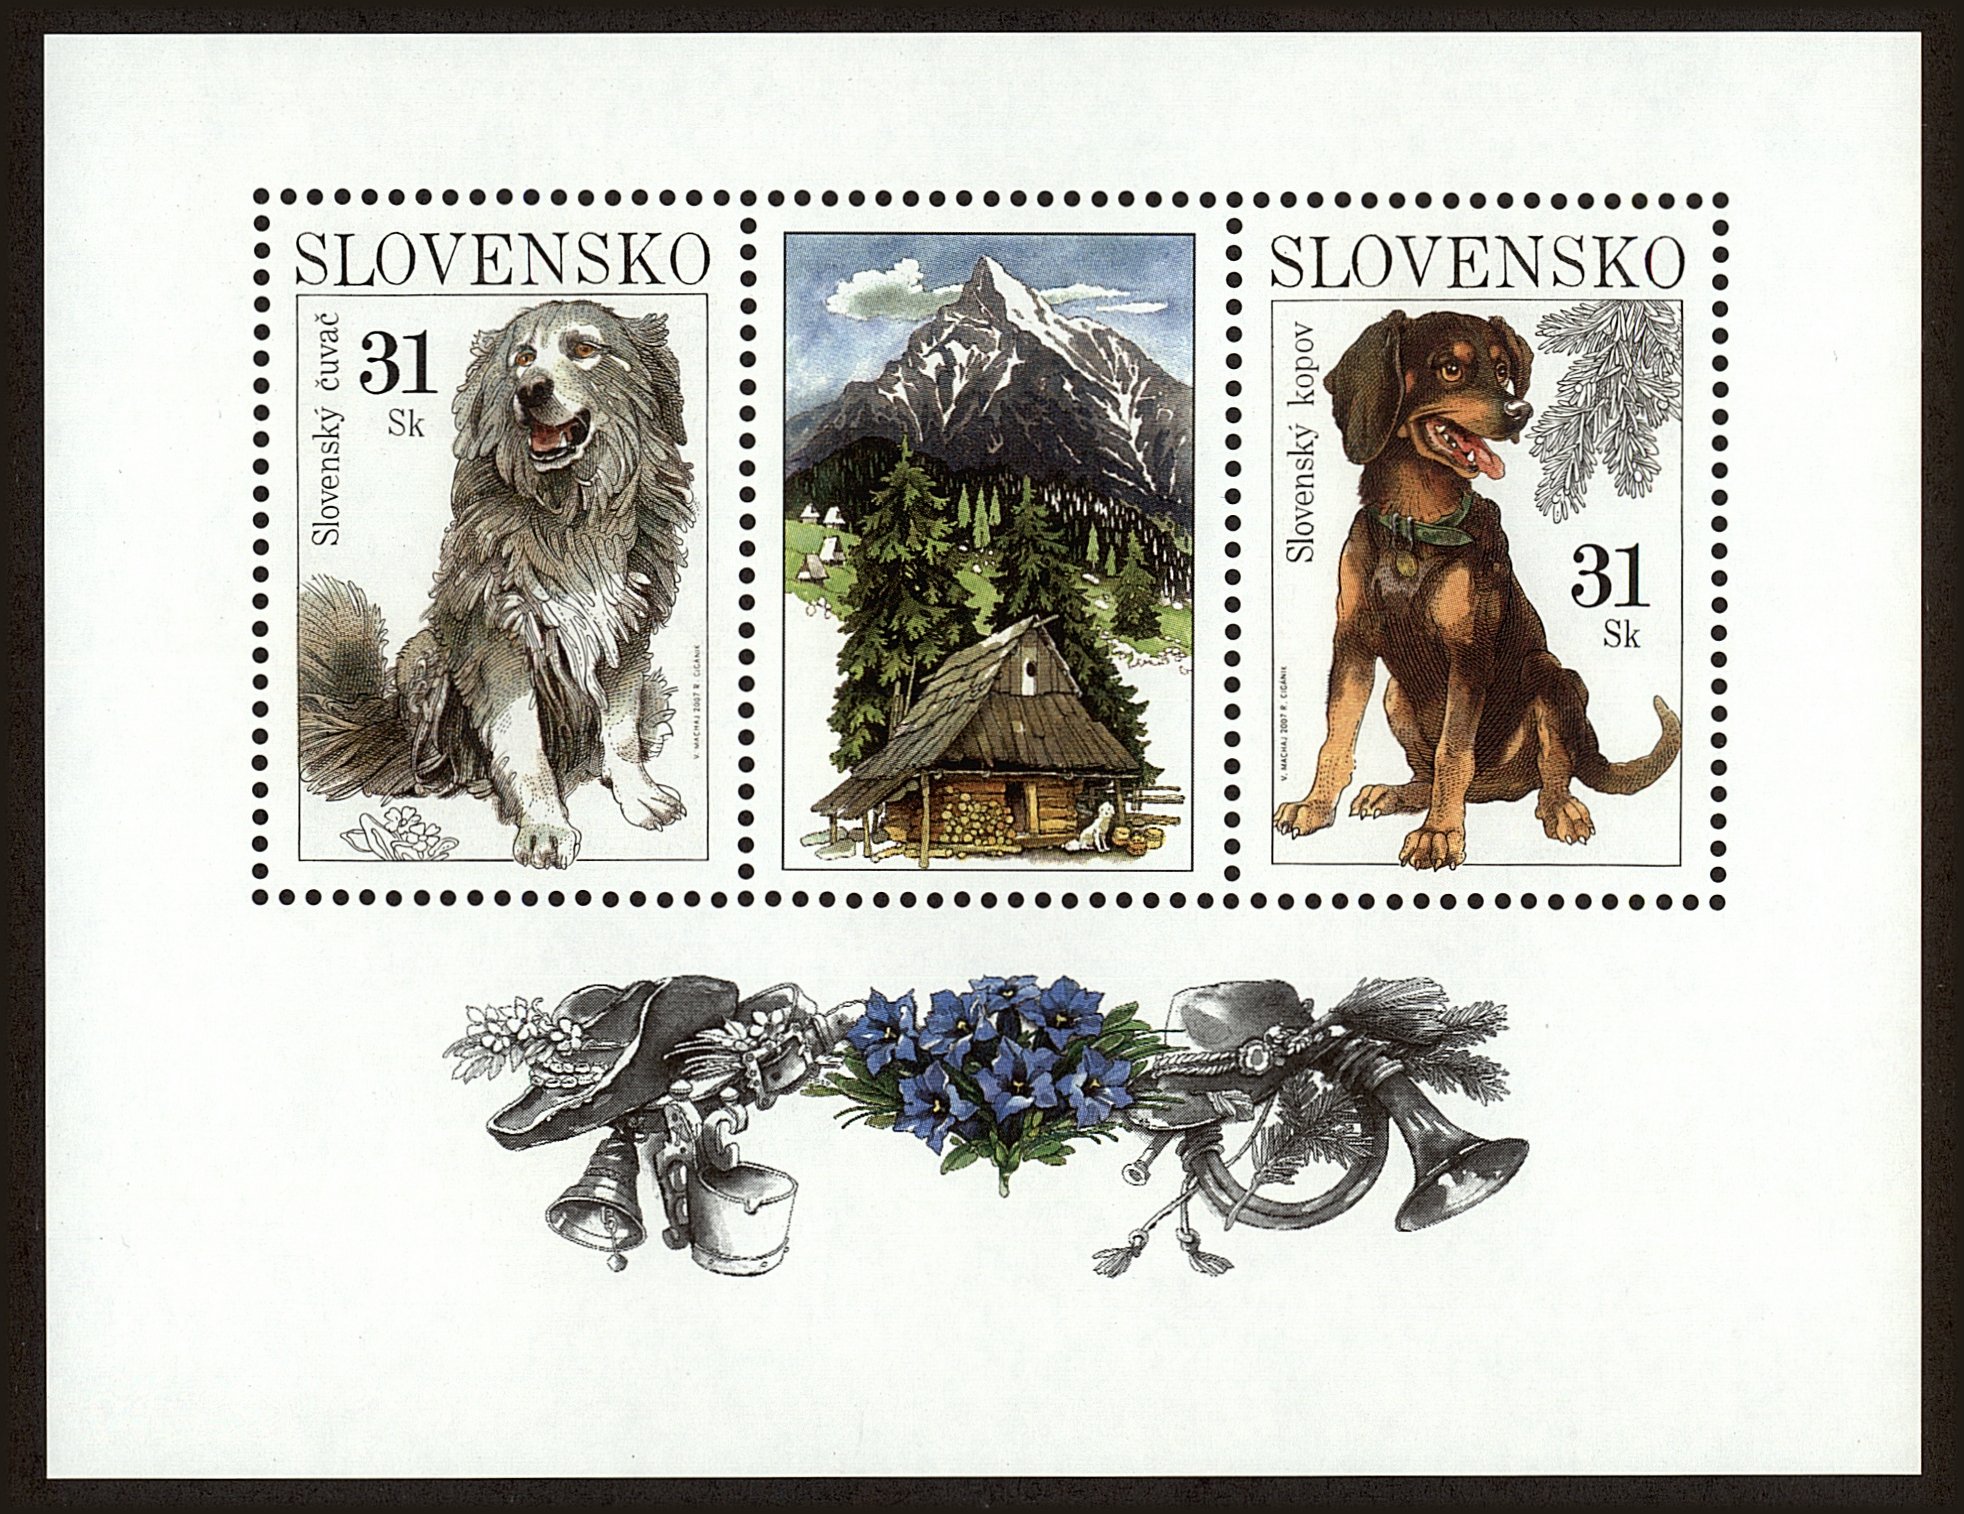 Front view of Slovakia 517 collectors stamp